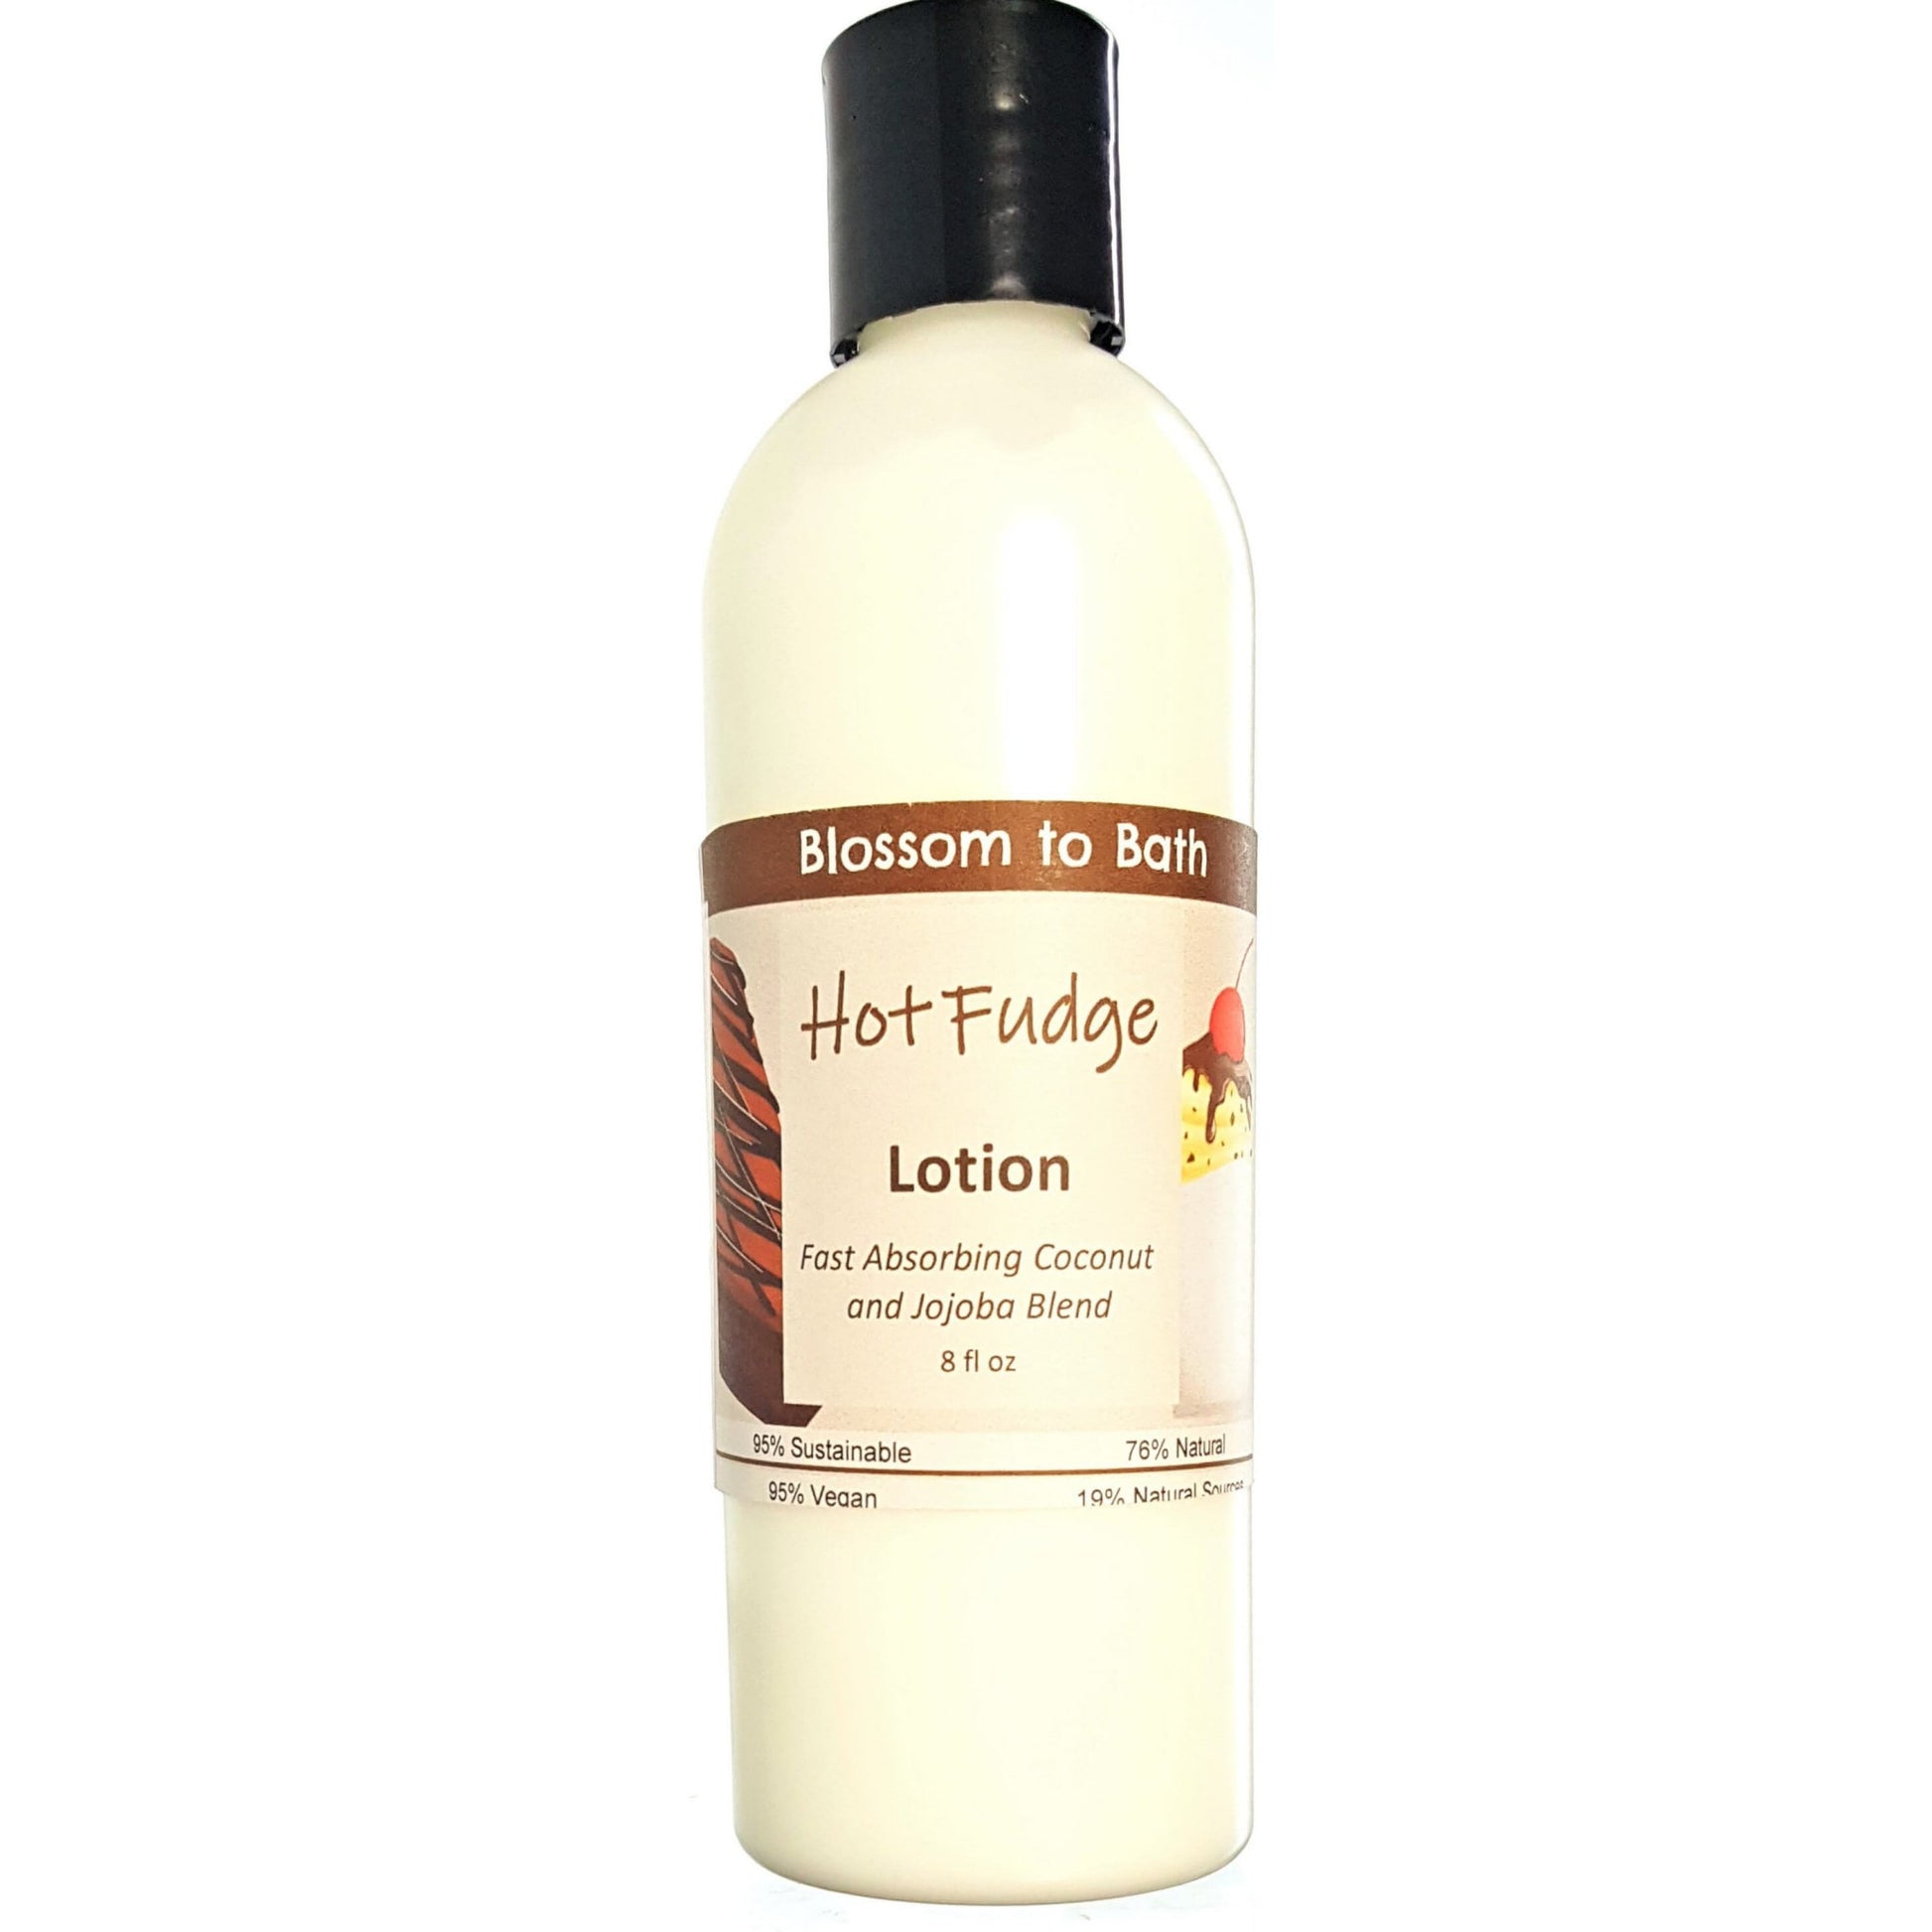 Buy Blossom to Bath Hot Fudge Lotion from Flowersong Soap Studio.  Daily moisture  that soaks in quickly made with organic oils and butters that soften and smooth the skin  The fragrance is three layers deep in rich chocolate.